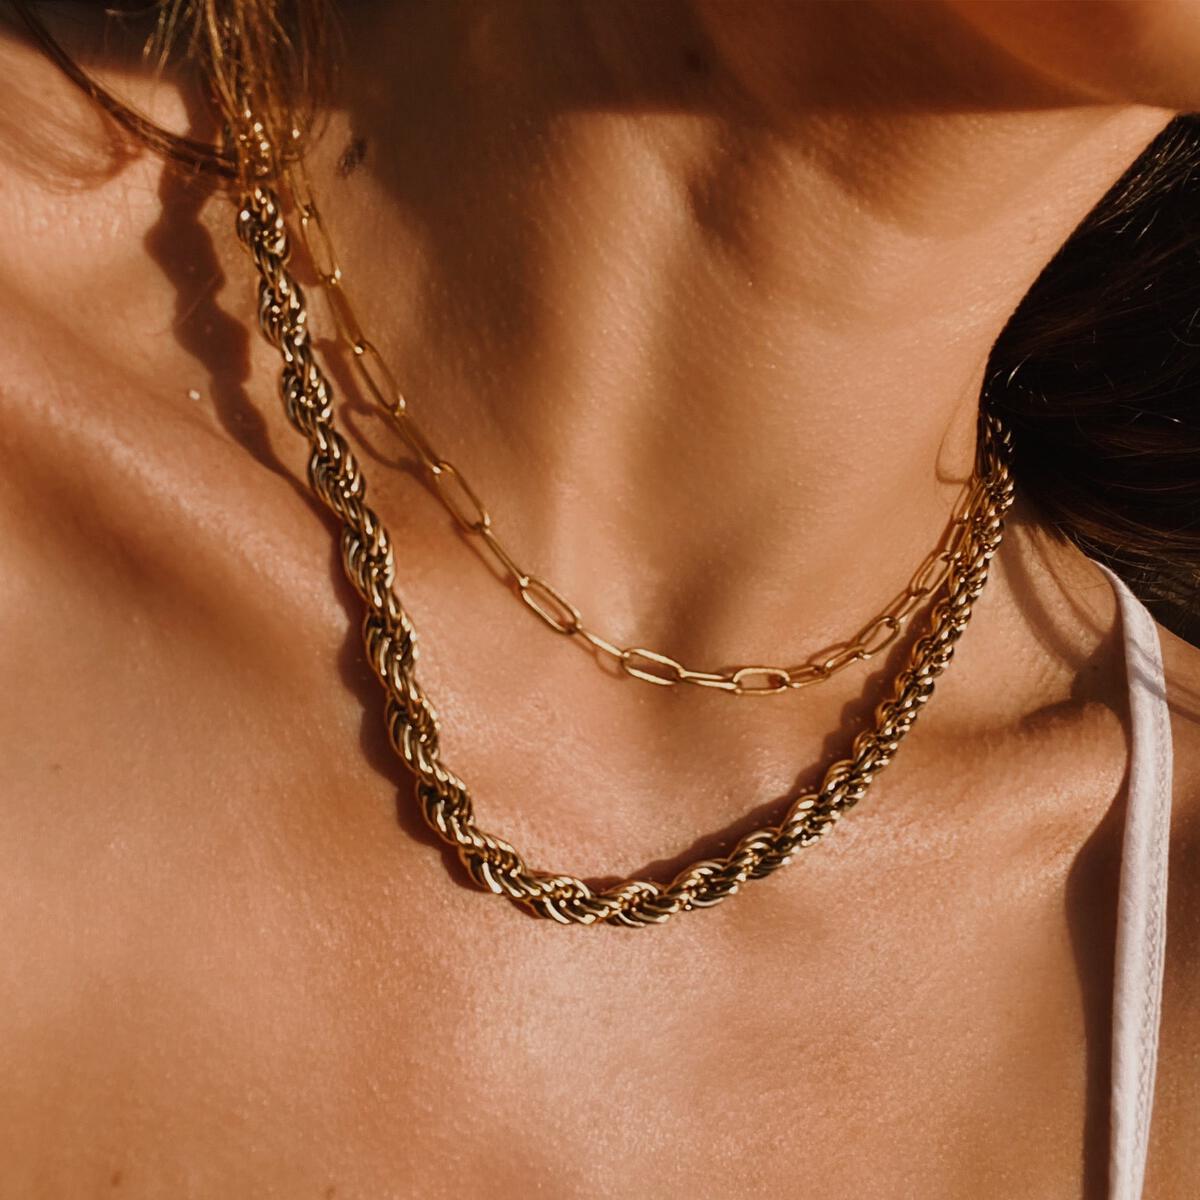 18K Gold Plated and Waterproof Heartbreaker Necklace. ALCO Jewelry.